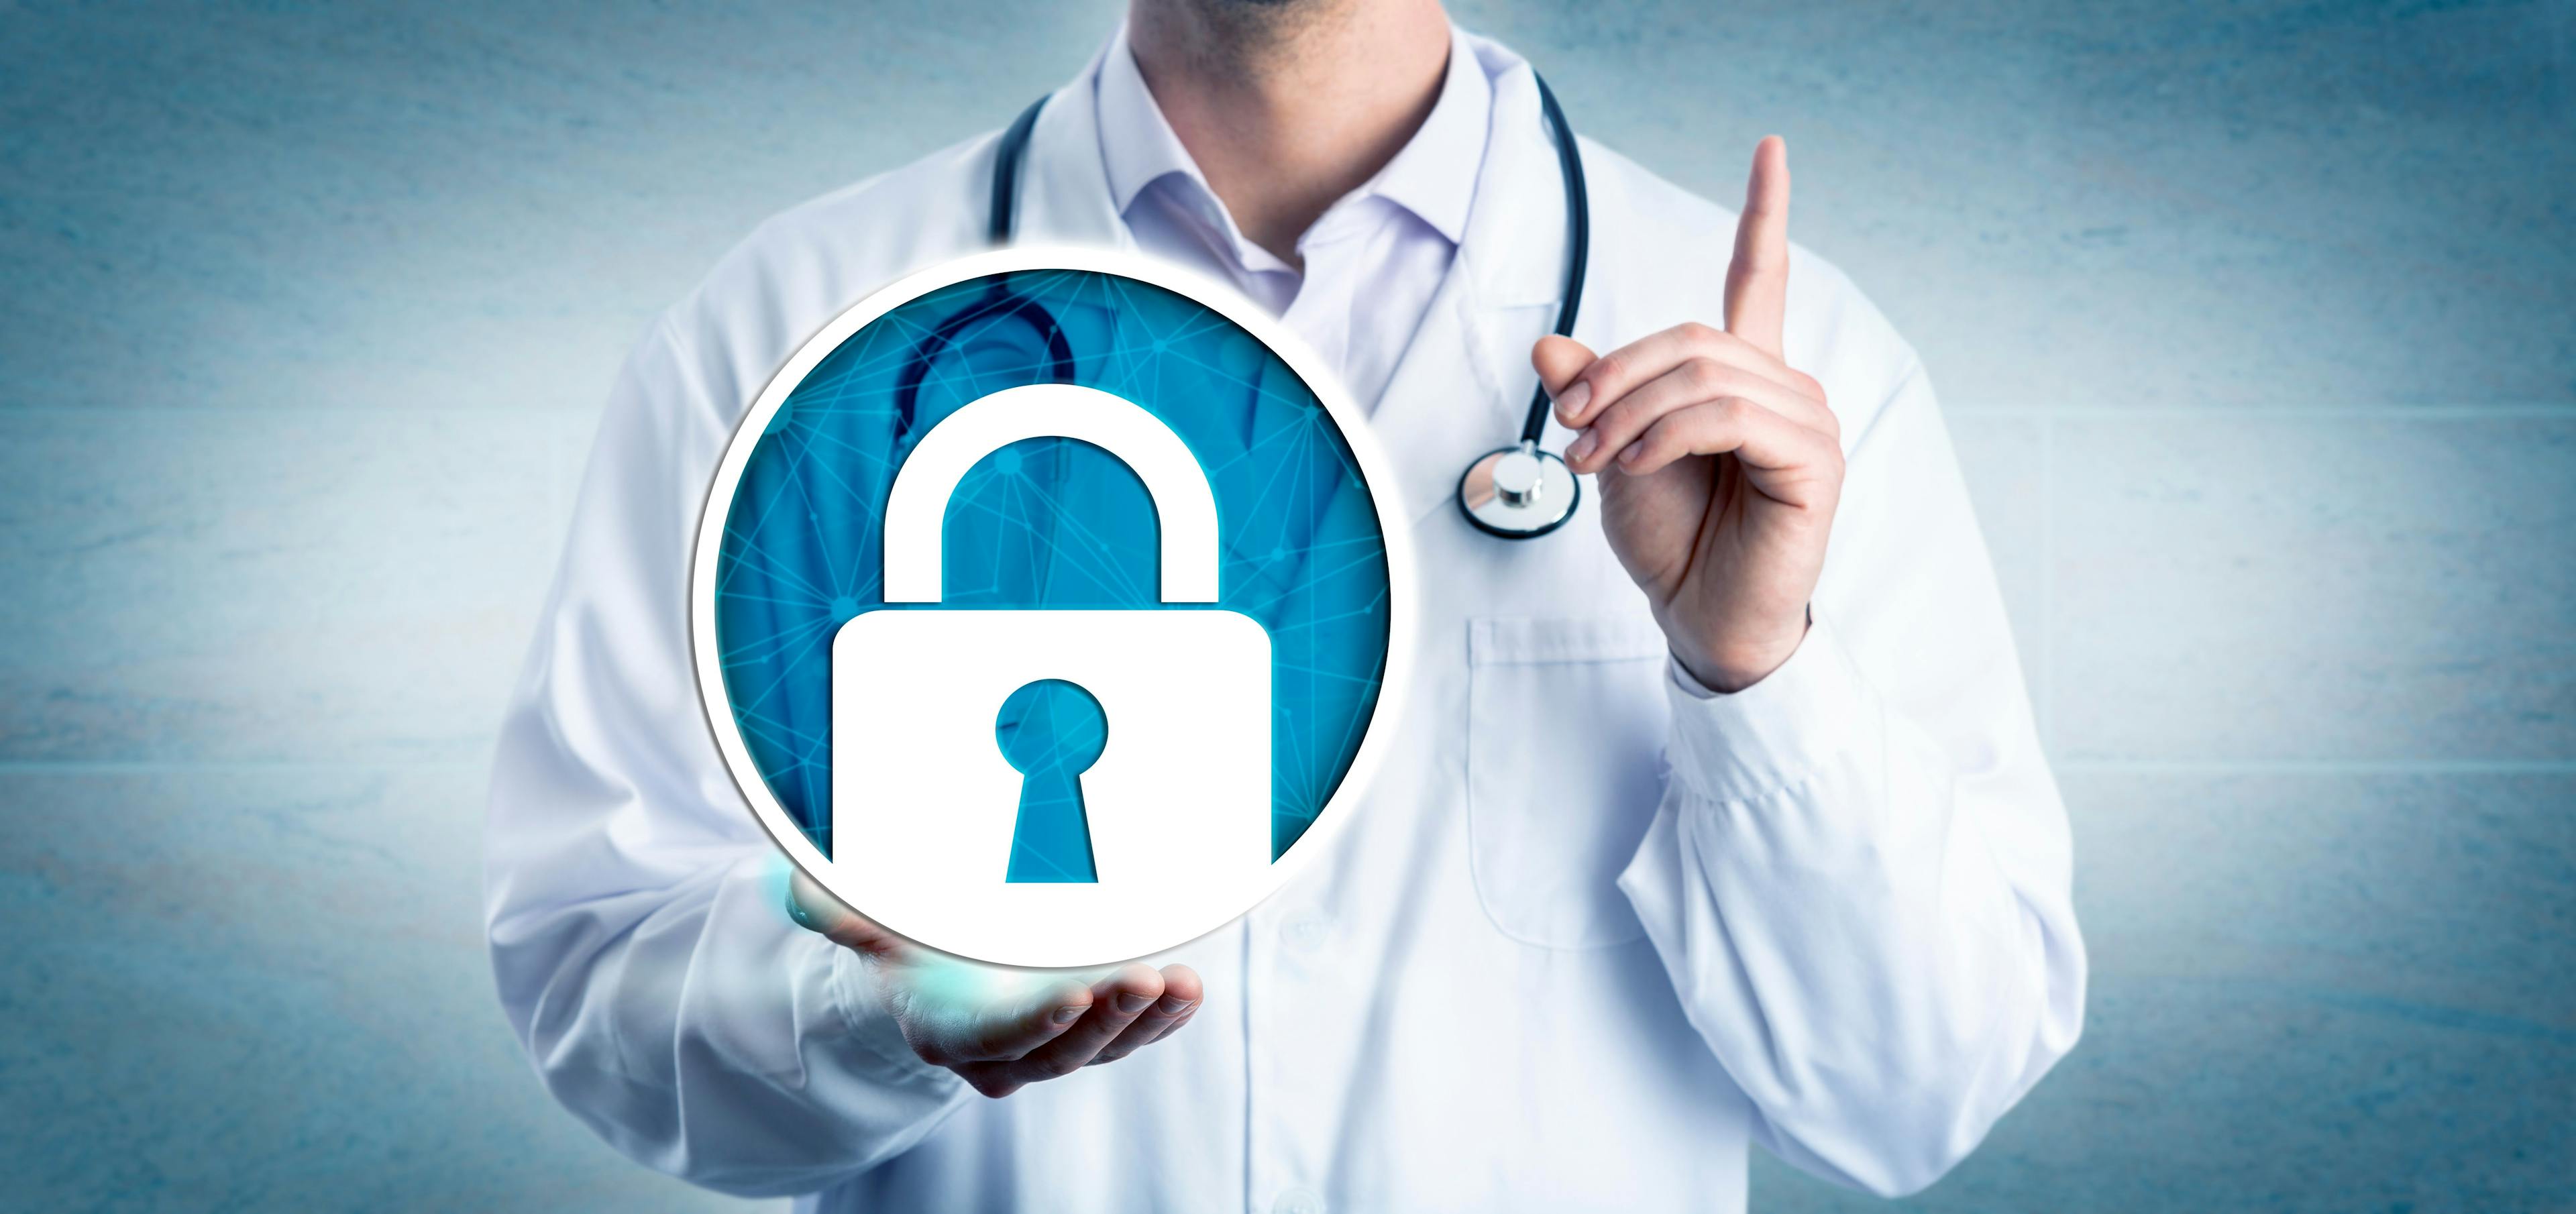 Cybersecurity is crucial for independent pharmacies / leowolfert - stock.adobe.com